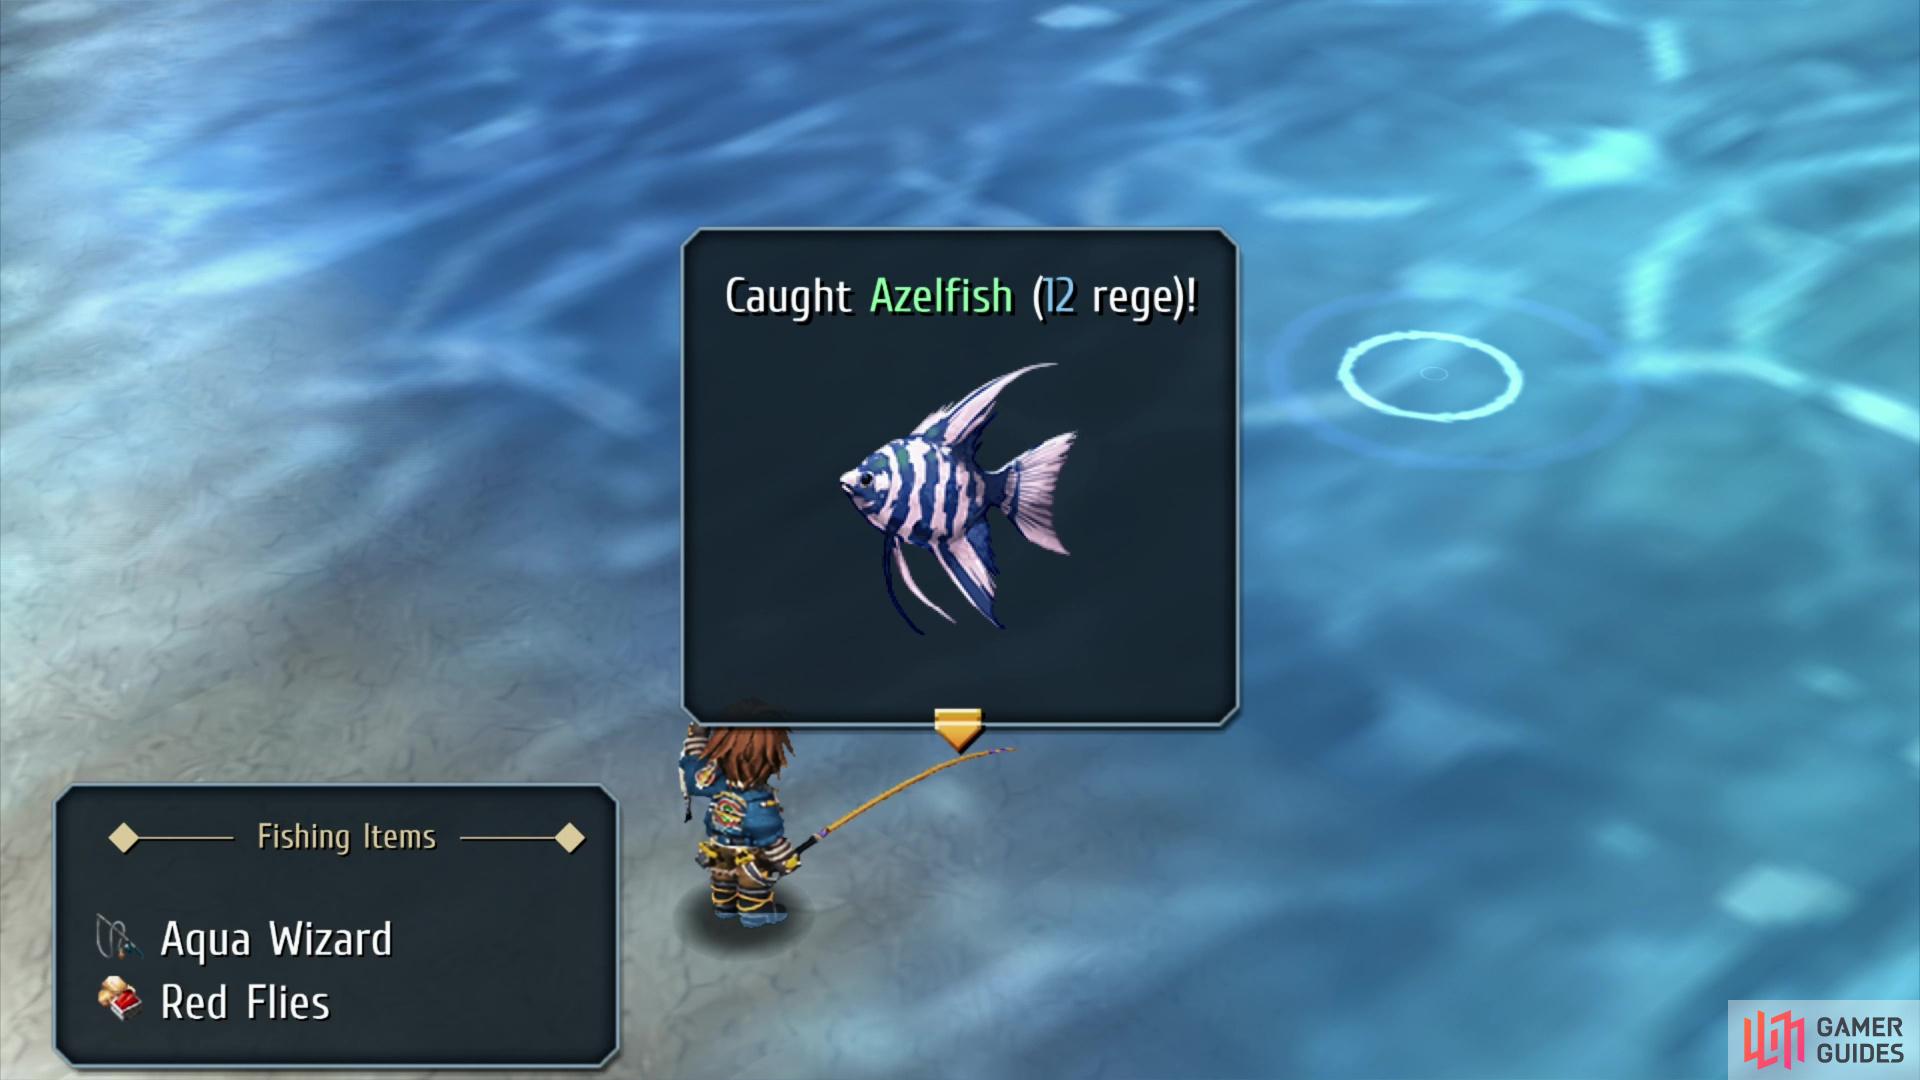 At the Ursula Road - Lakeshore fishing spot you can find Azelfish,